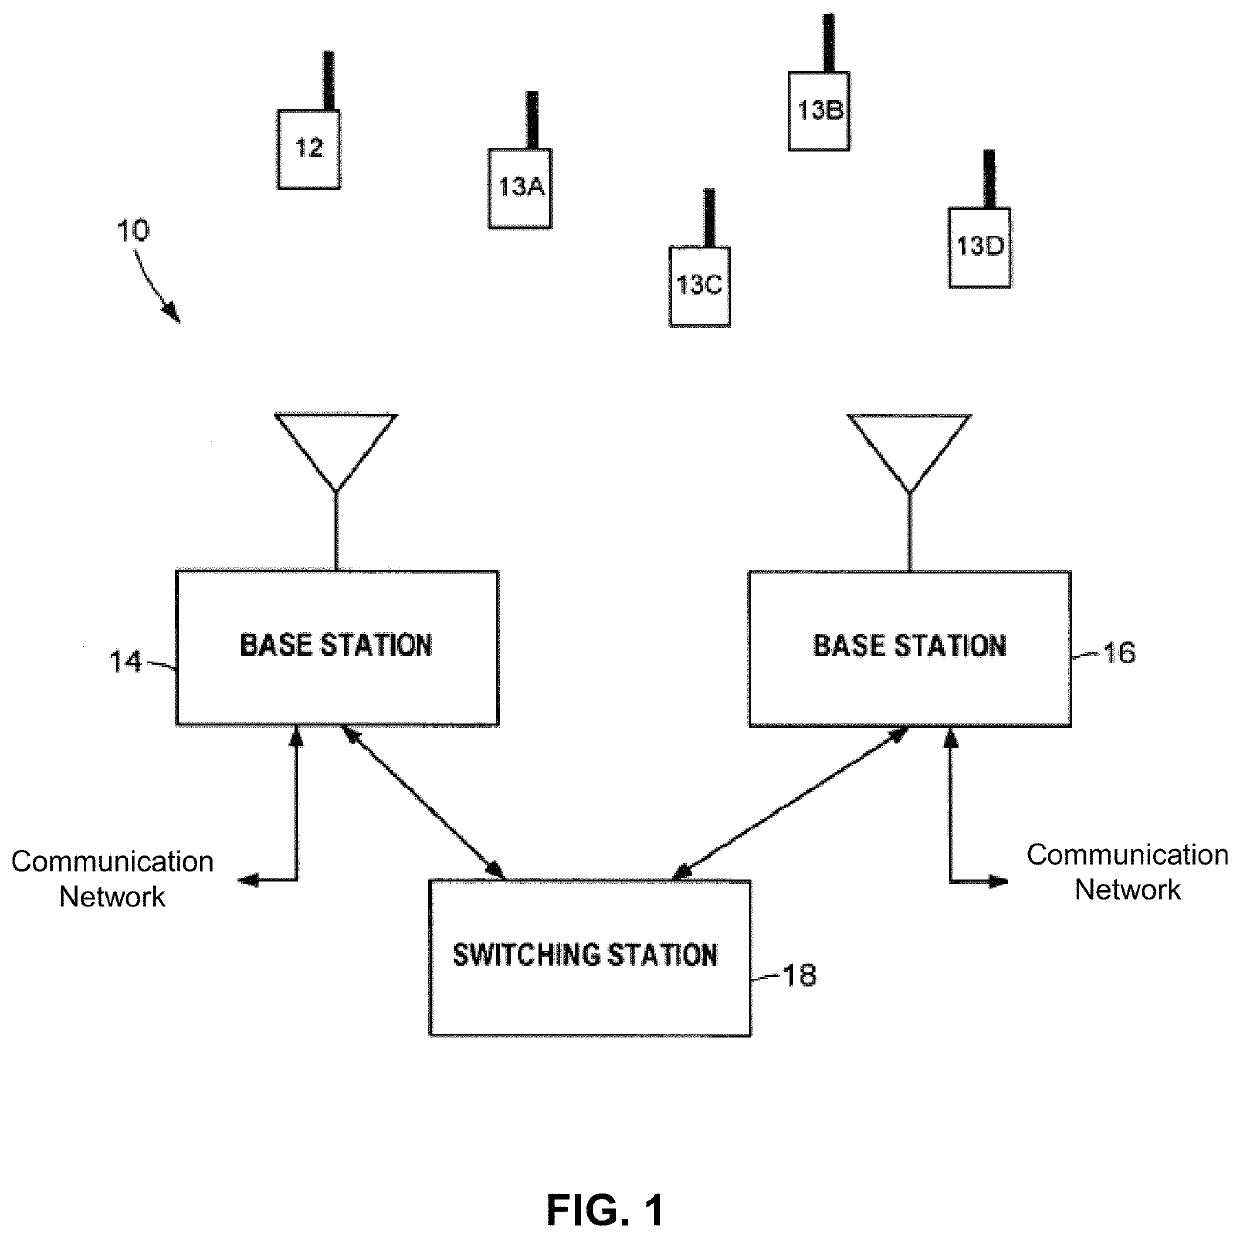 Signal conditioning to mitigate interference impacting wireless communication links in radio access networks